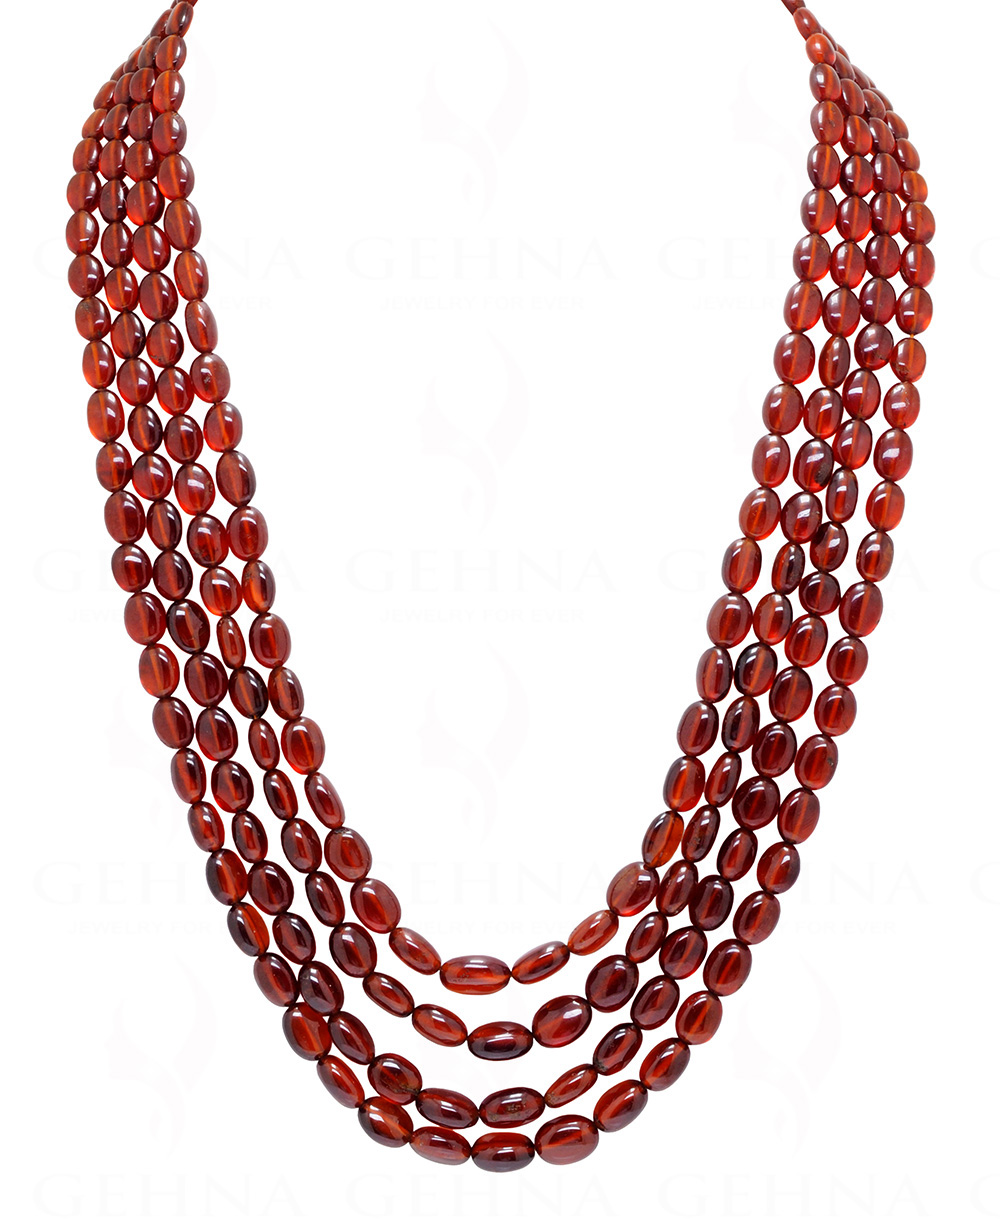 4 Rows Of Hessonite Gemstone Oval Shape Beads Necklace NP-1443